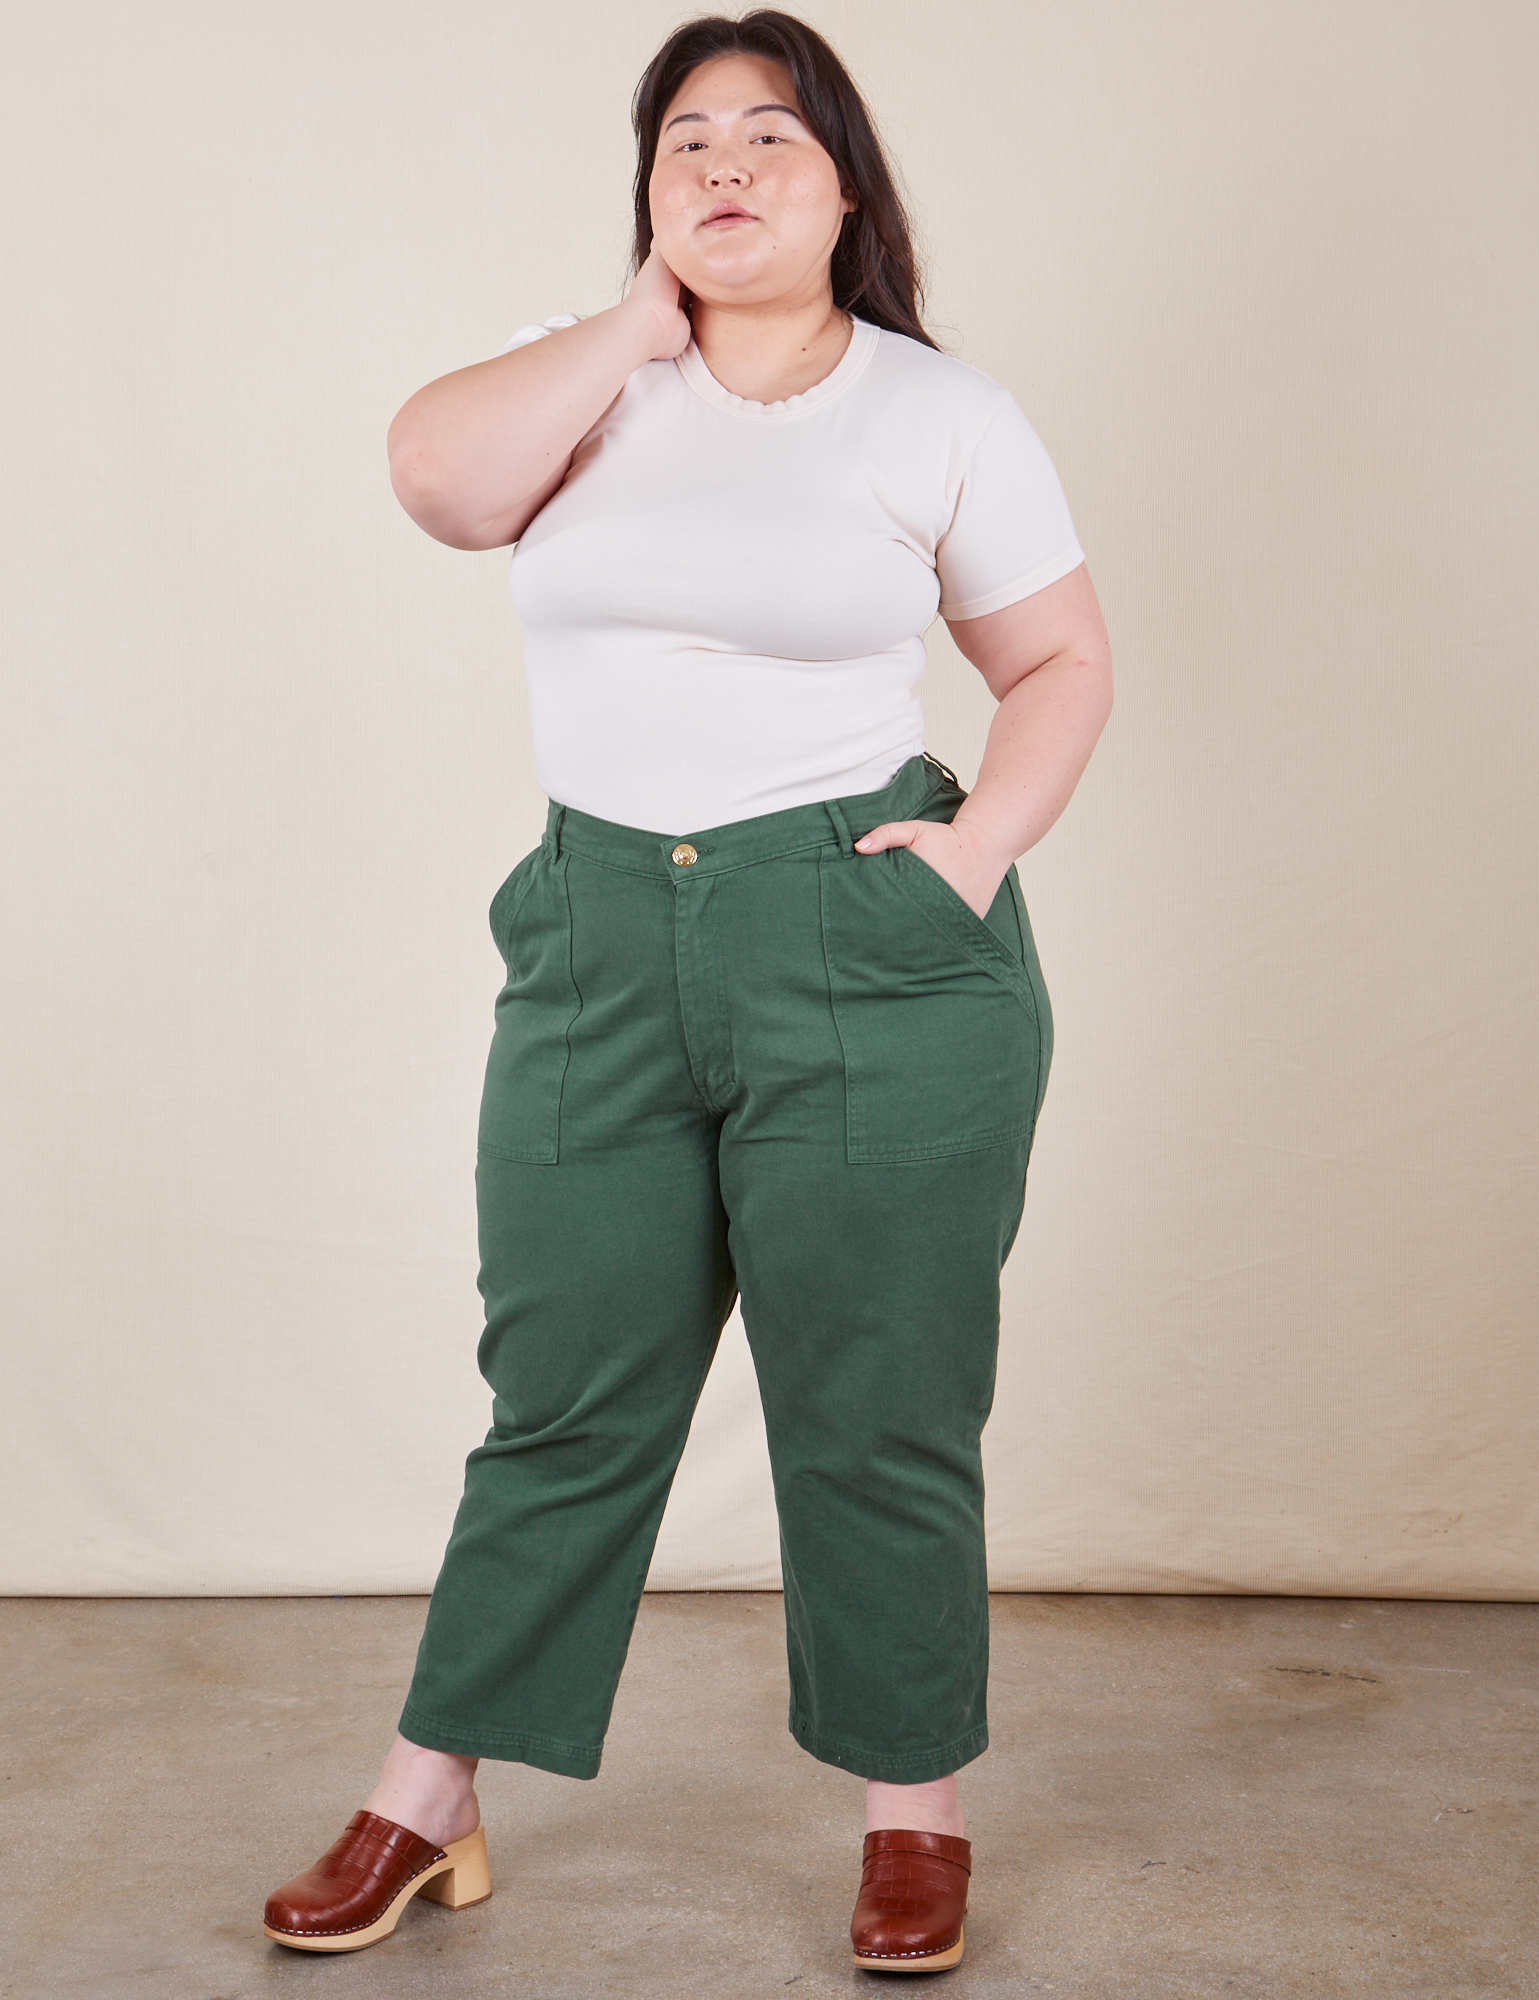 Ashley is 5&#39;7&quot; and wearing Petite 1XL Work Pants in Dark Emerald Green paired with vintage off-white Baby Tee